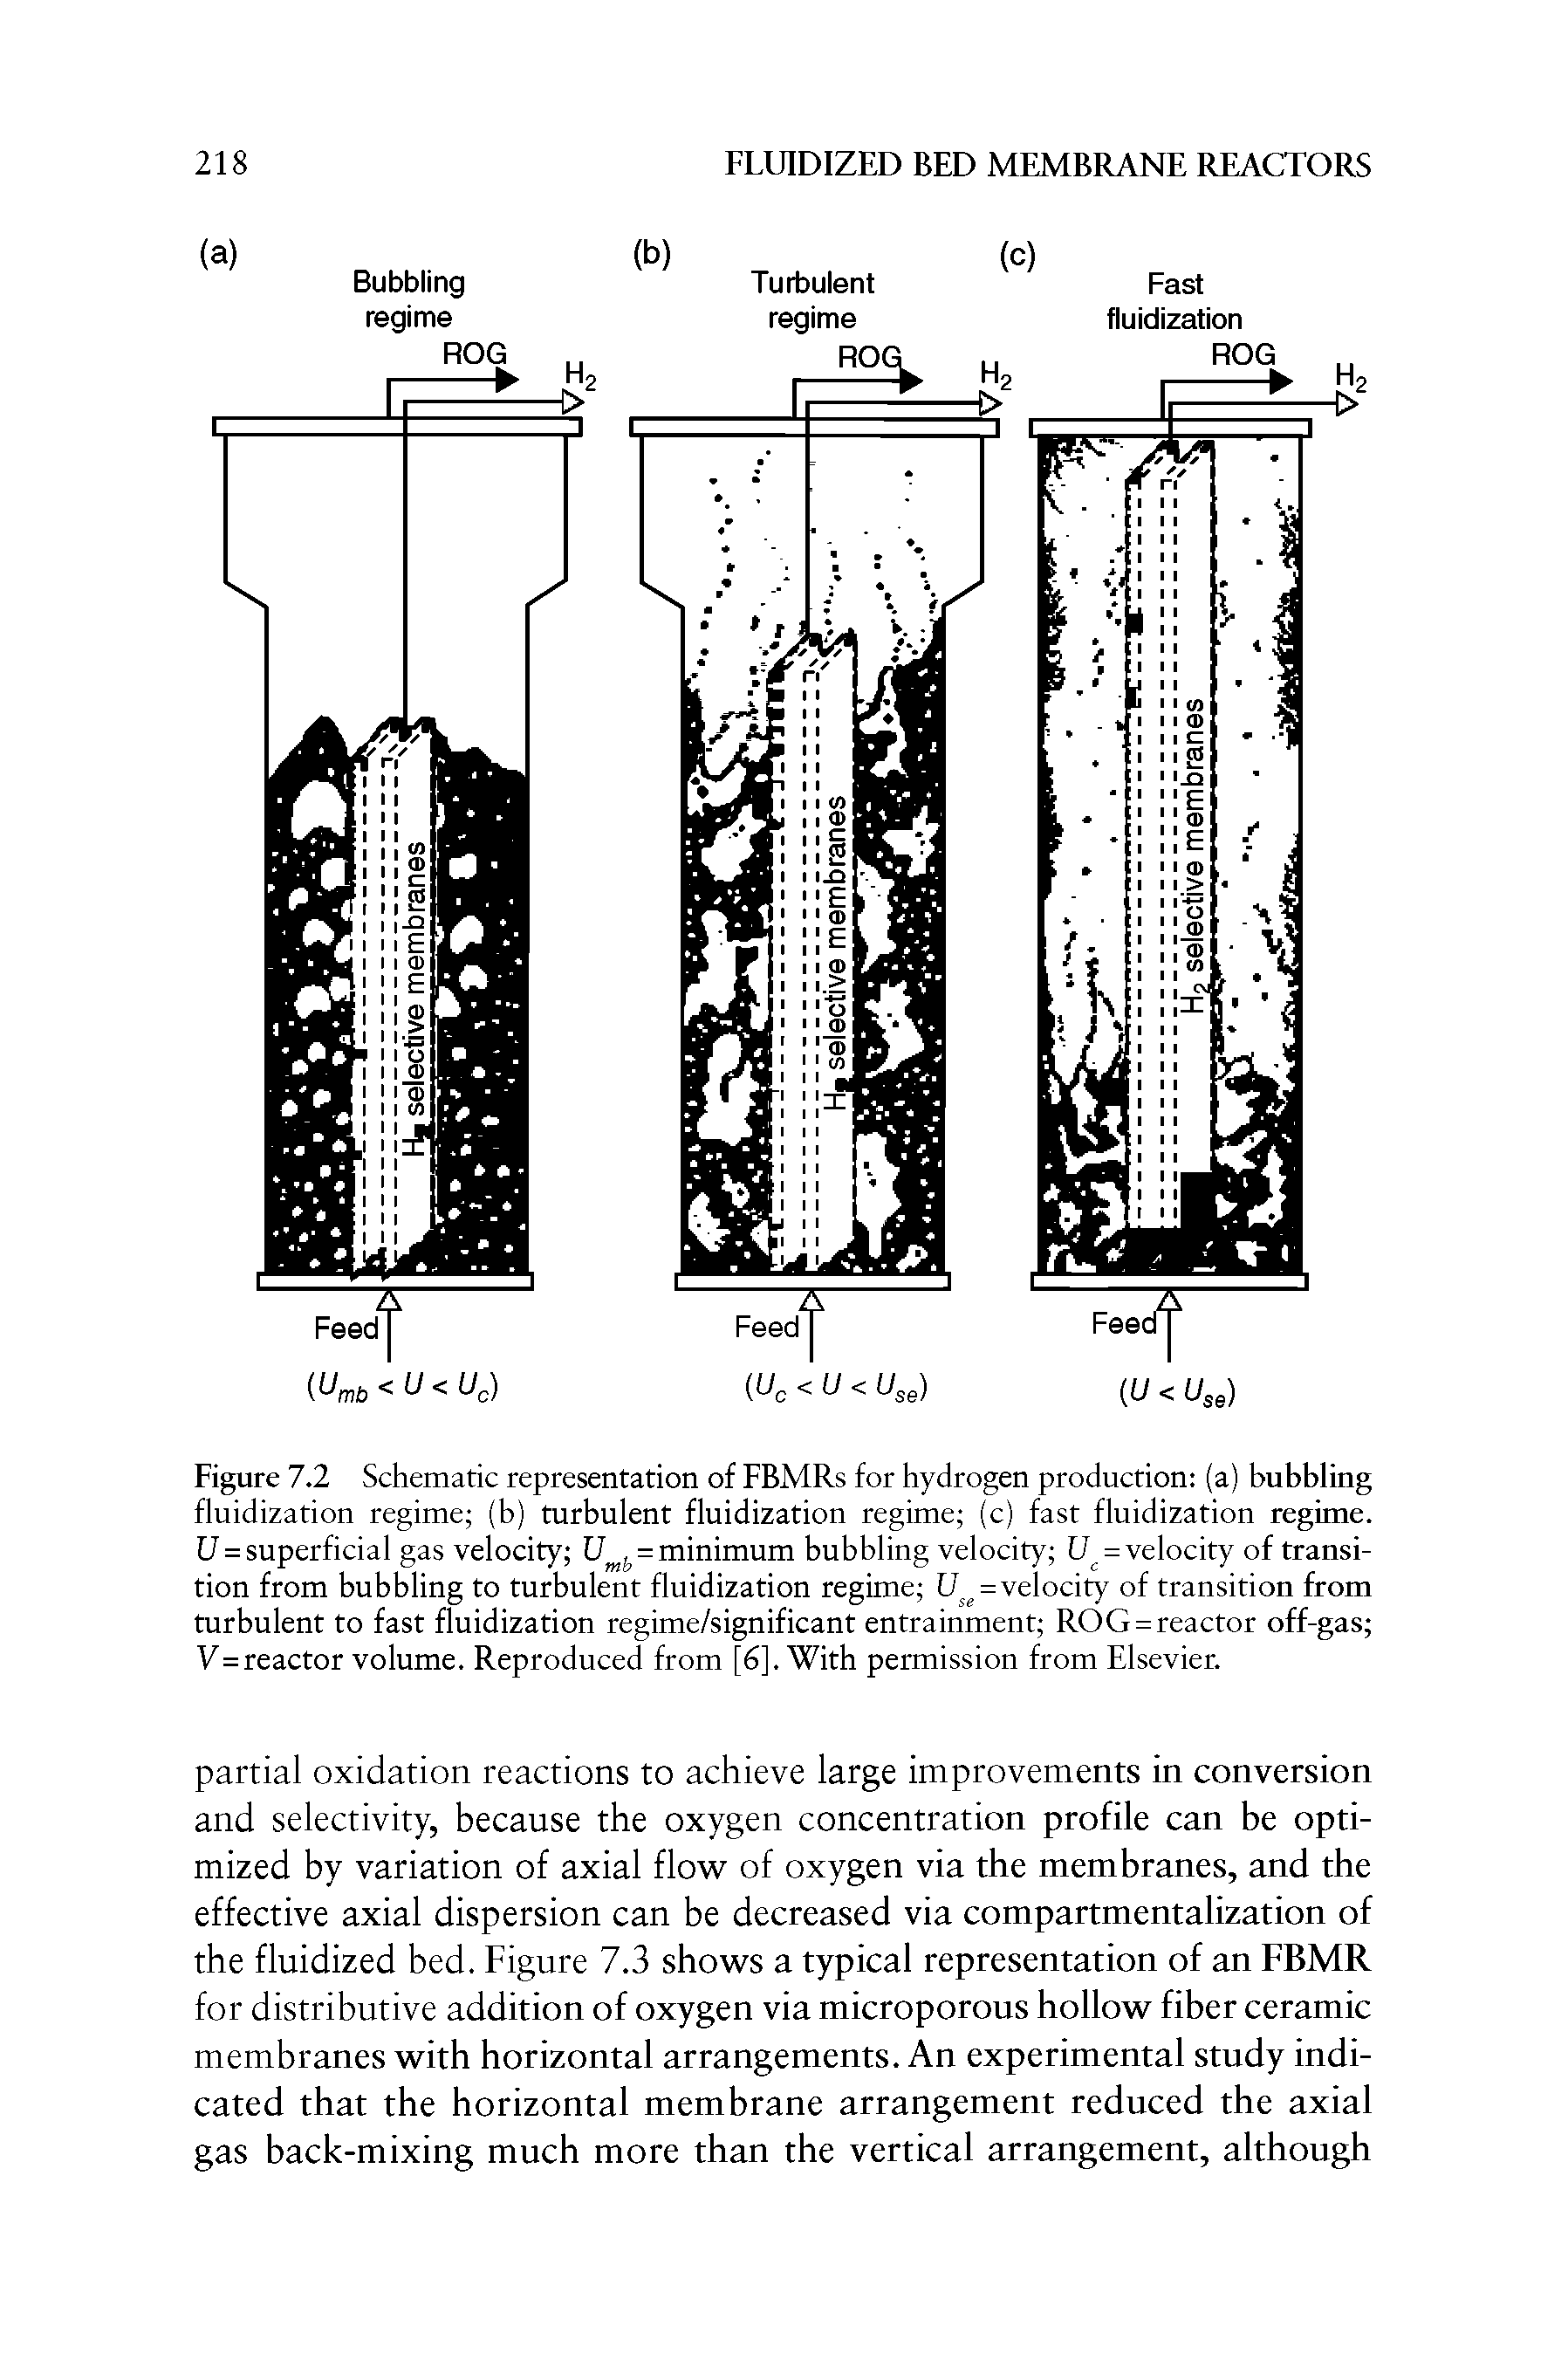 Figure 7.2 Schematic representation of FBMRs for hydrogen production (a) bubbling fluidization regime (b) turbulent fluidization regime (c) fast fluidization regime. U = superficial gas velocity [7 = minimum bubbling velocity U =velocity of transition from bubbling to turbulent fluidization regime U =velocity of transition from turbulent to fast fluidization regime/significant entrainment ROG = reactor off-gas V=reactor volume. Reproduced from [6]. With permission from Elsevier.